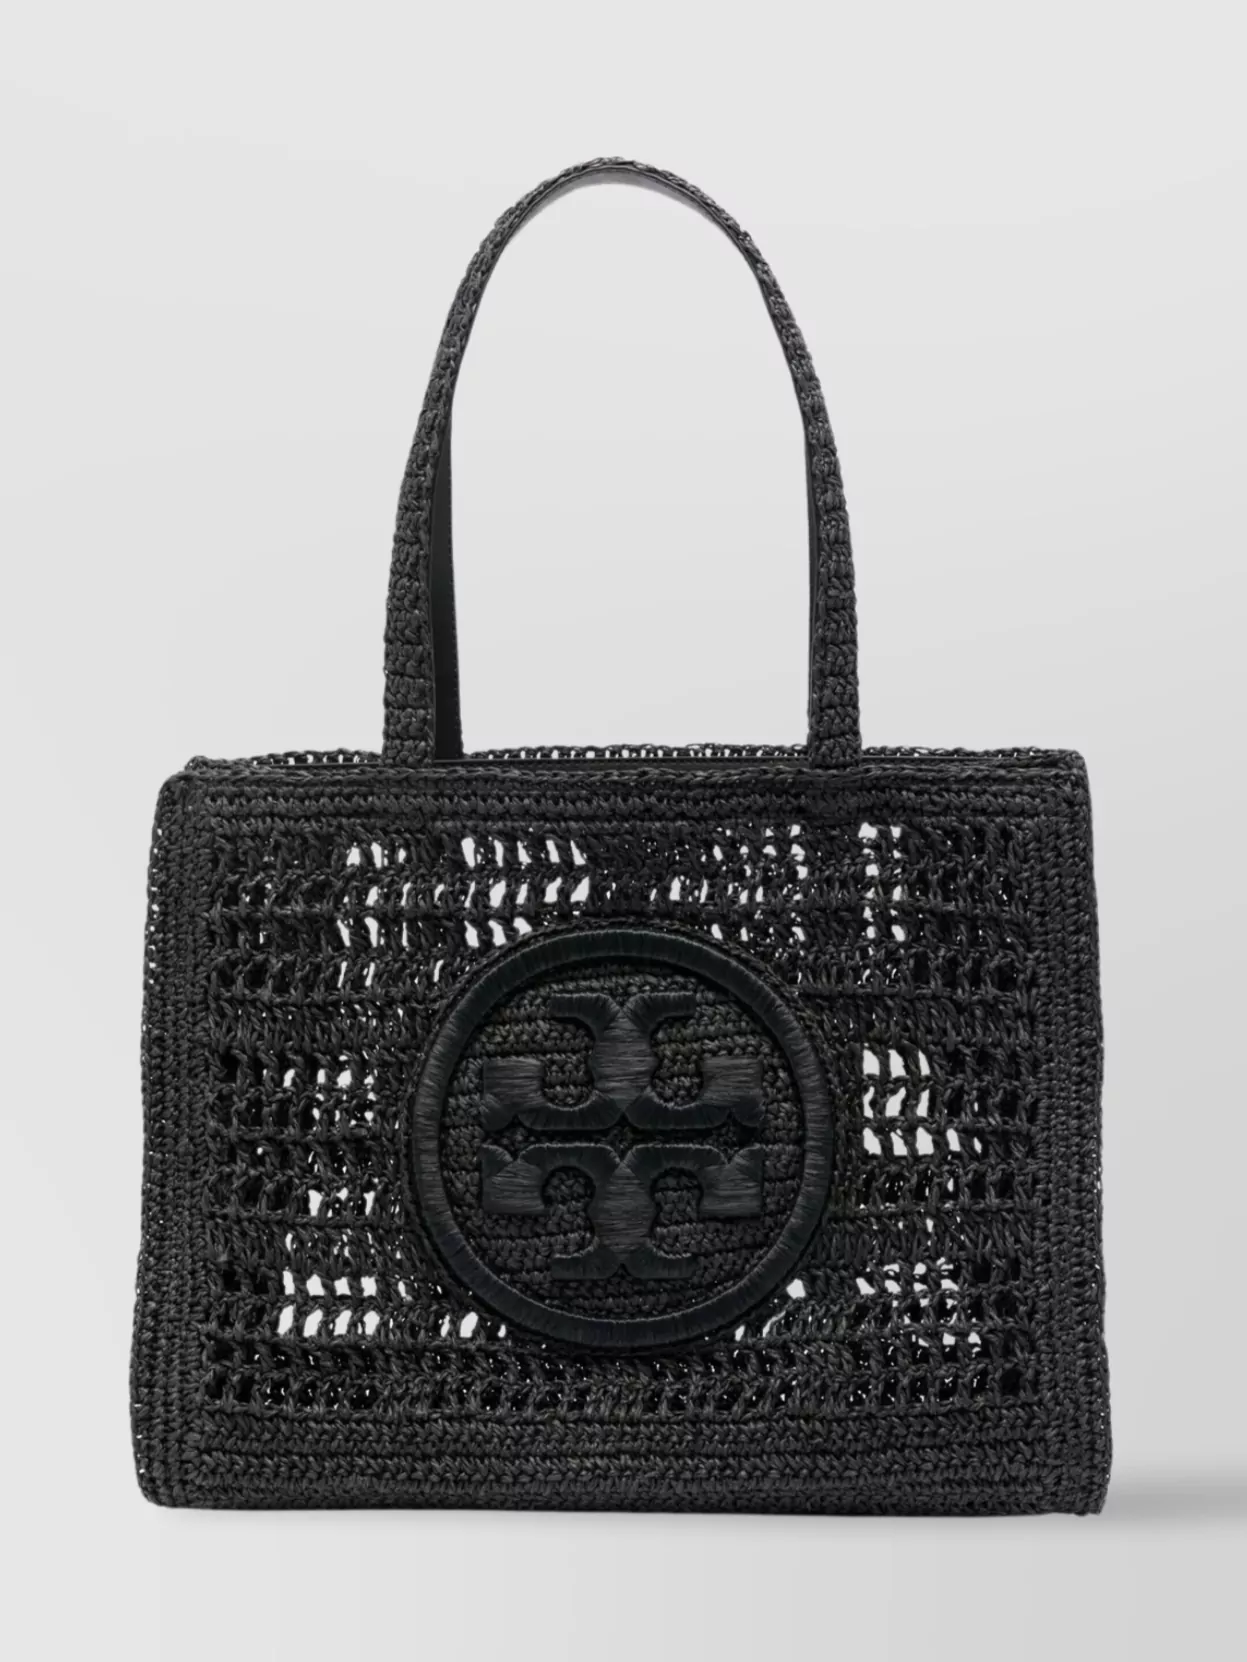 Tory Burch Hand-crocheted Small Tote Bag